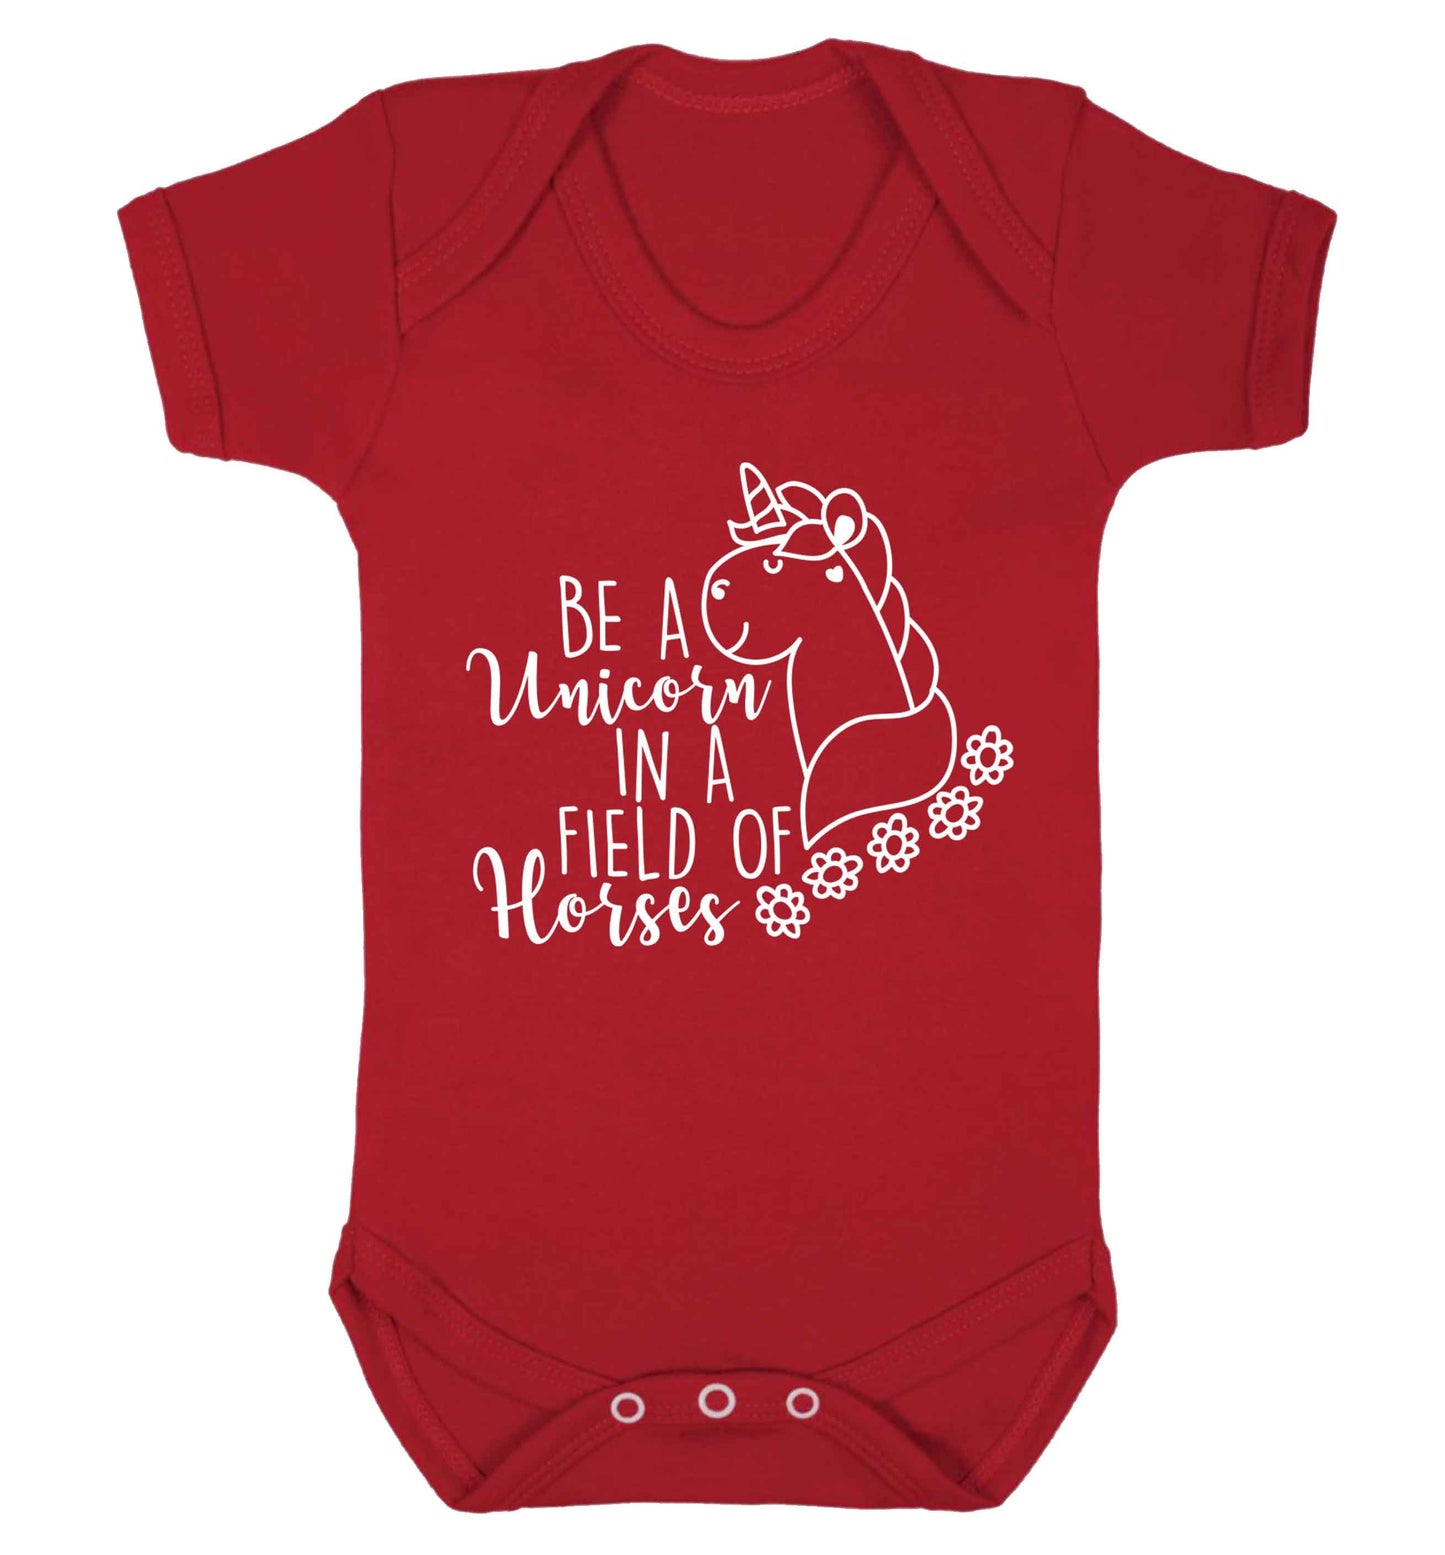 Be a unicorn in a field of horses Baby Vest red 18-24 months